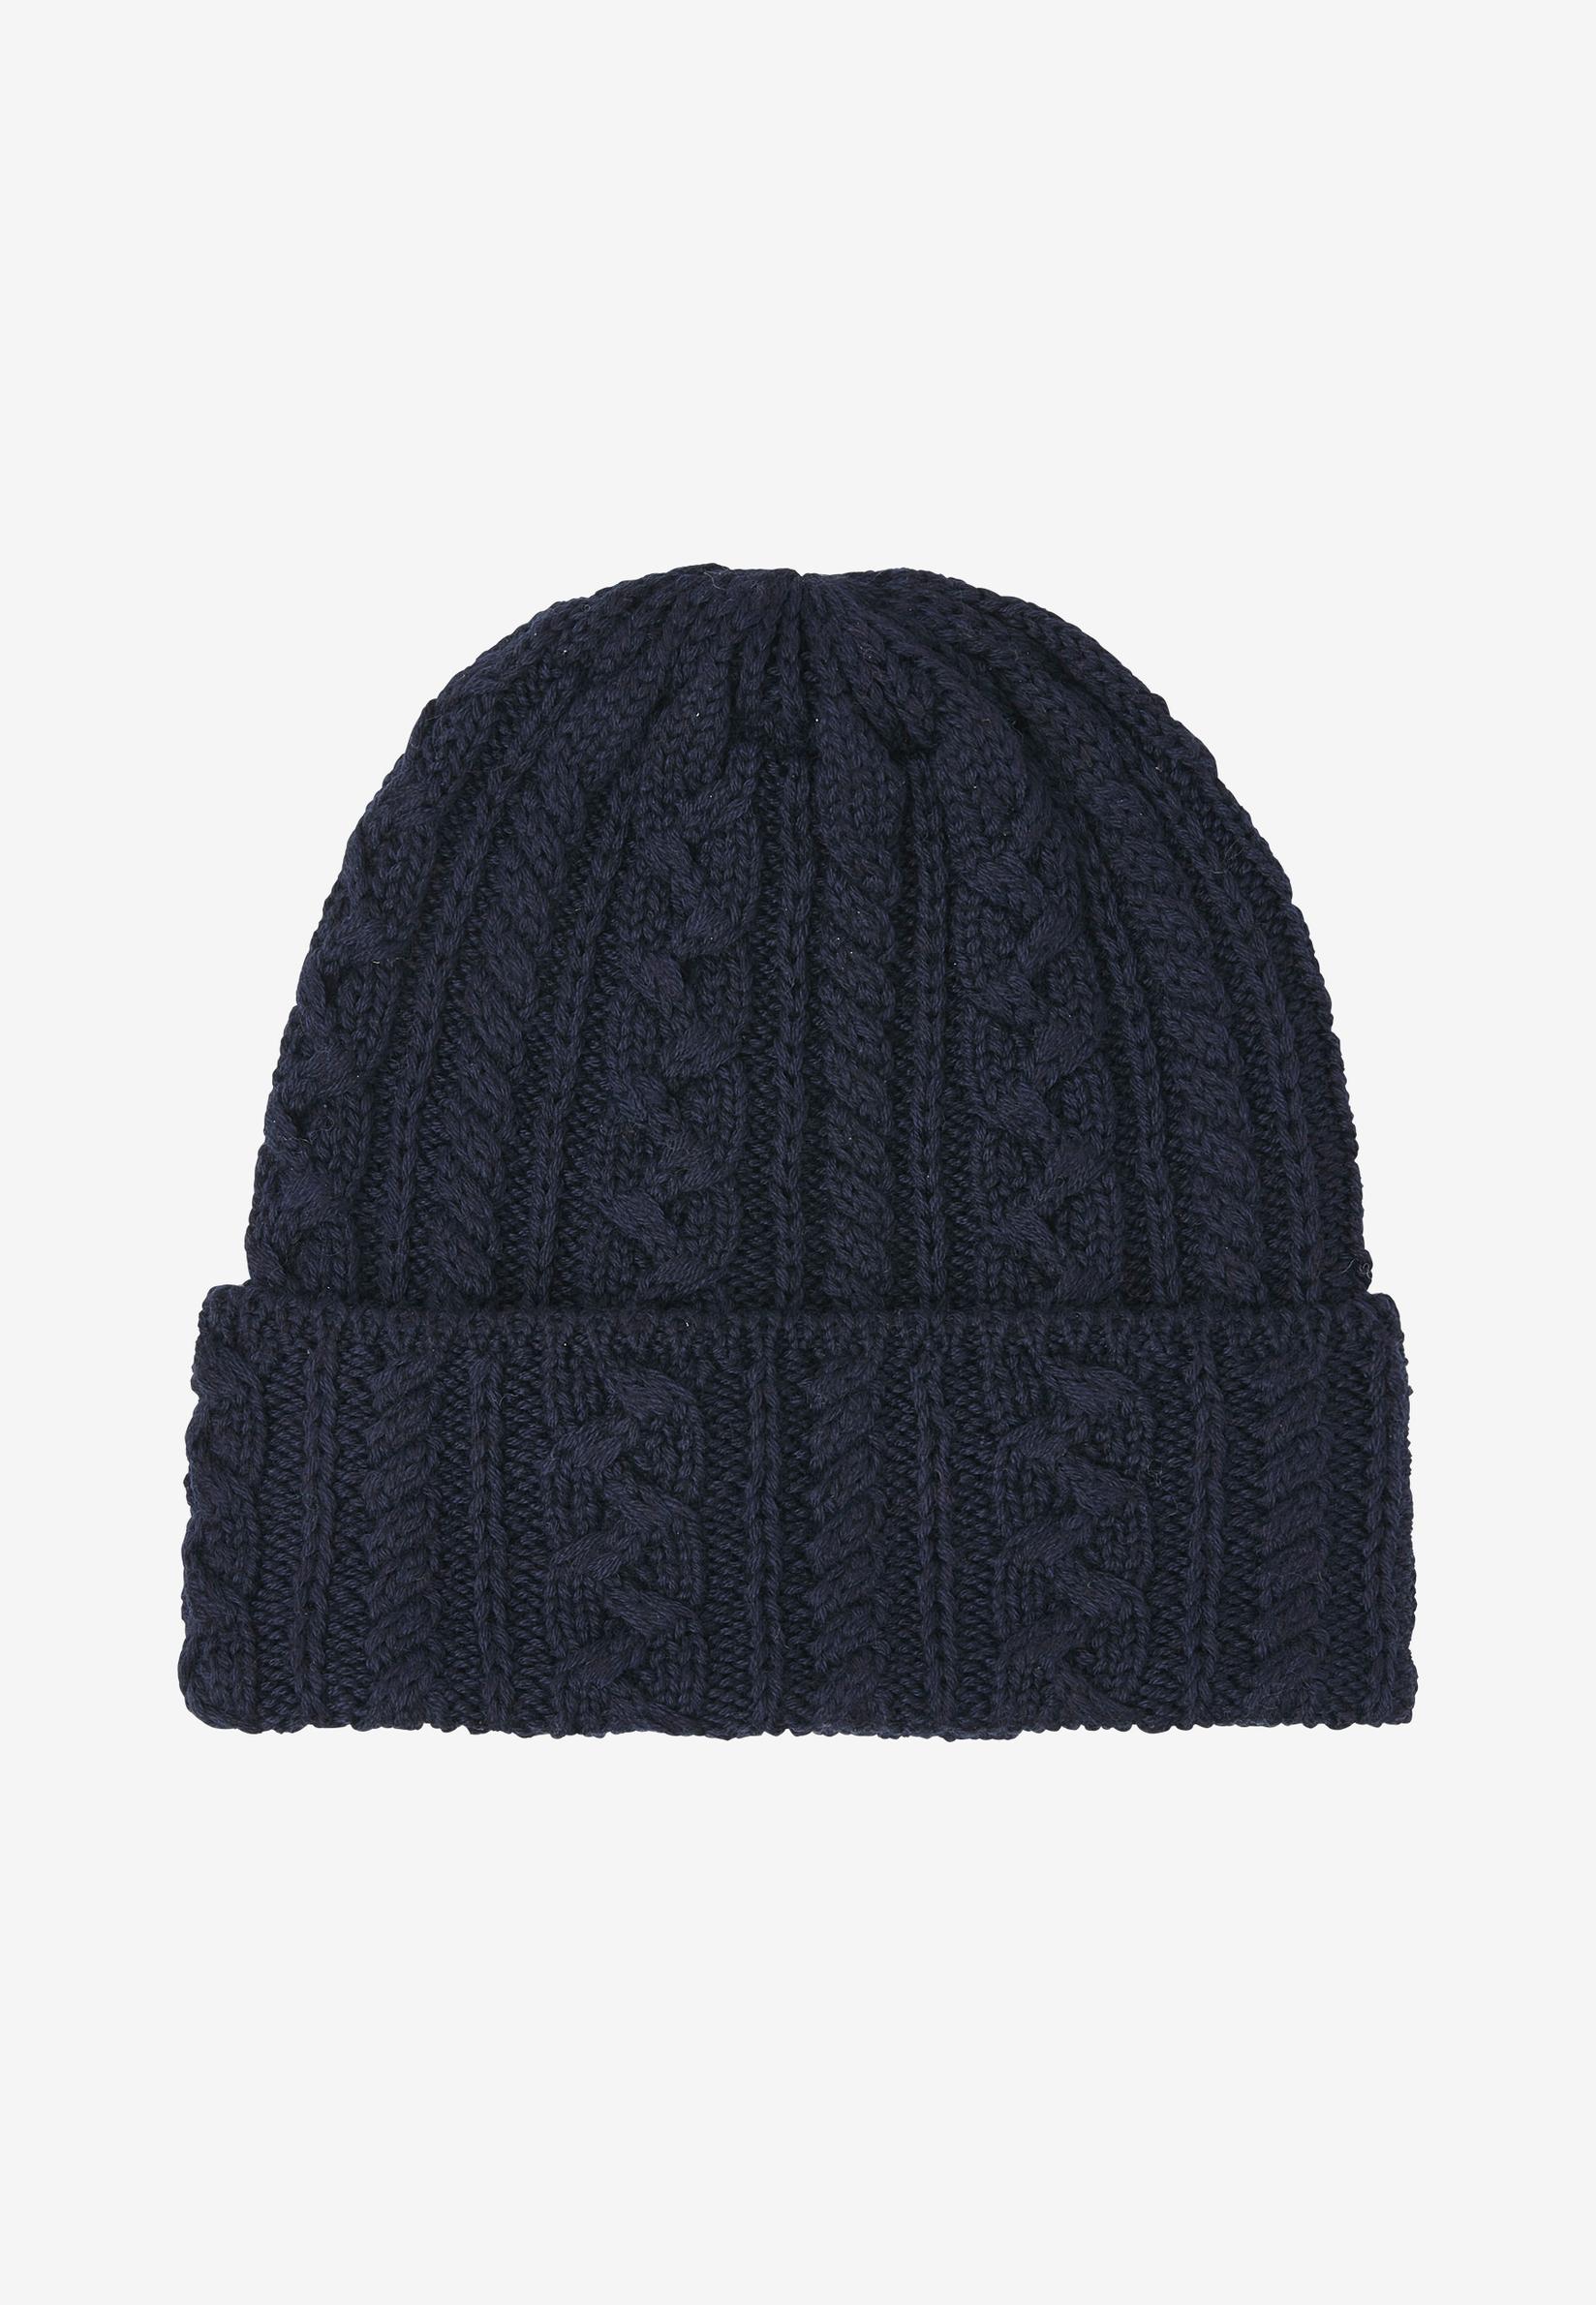 Selected image for MEXX Muška kapa Cable knitted beanie teget